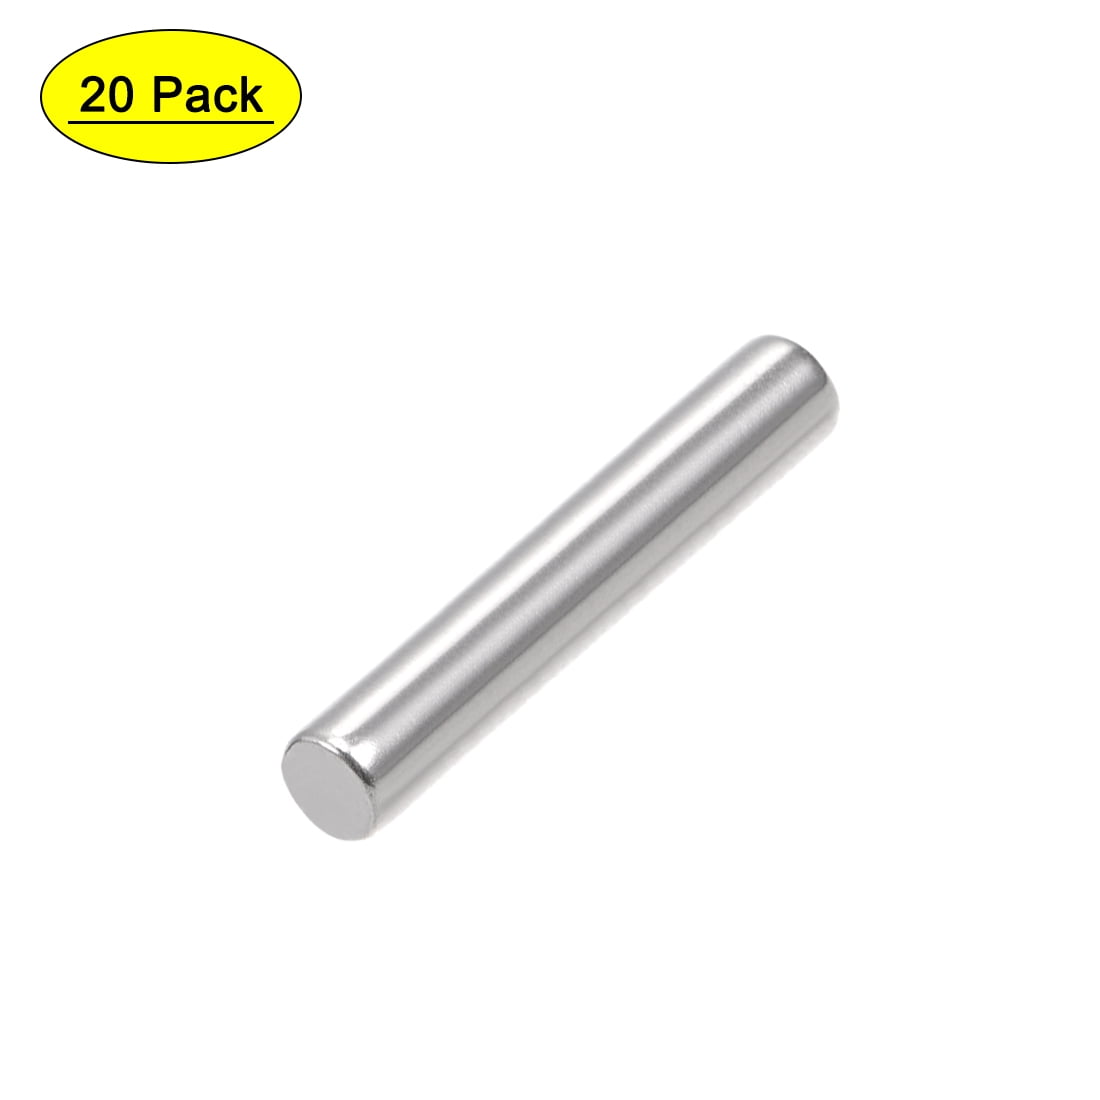 18-8 Stainless Steel Dowel Pins 5/32" Dia x 2.00" Length 20 Pieces 